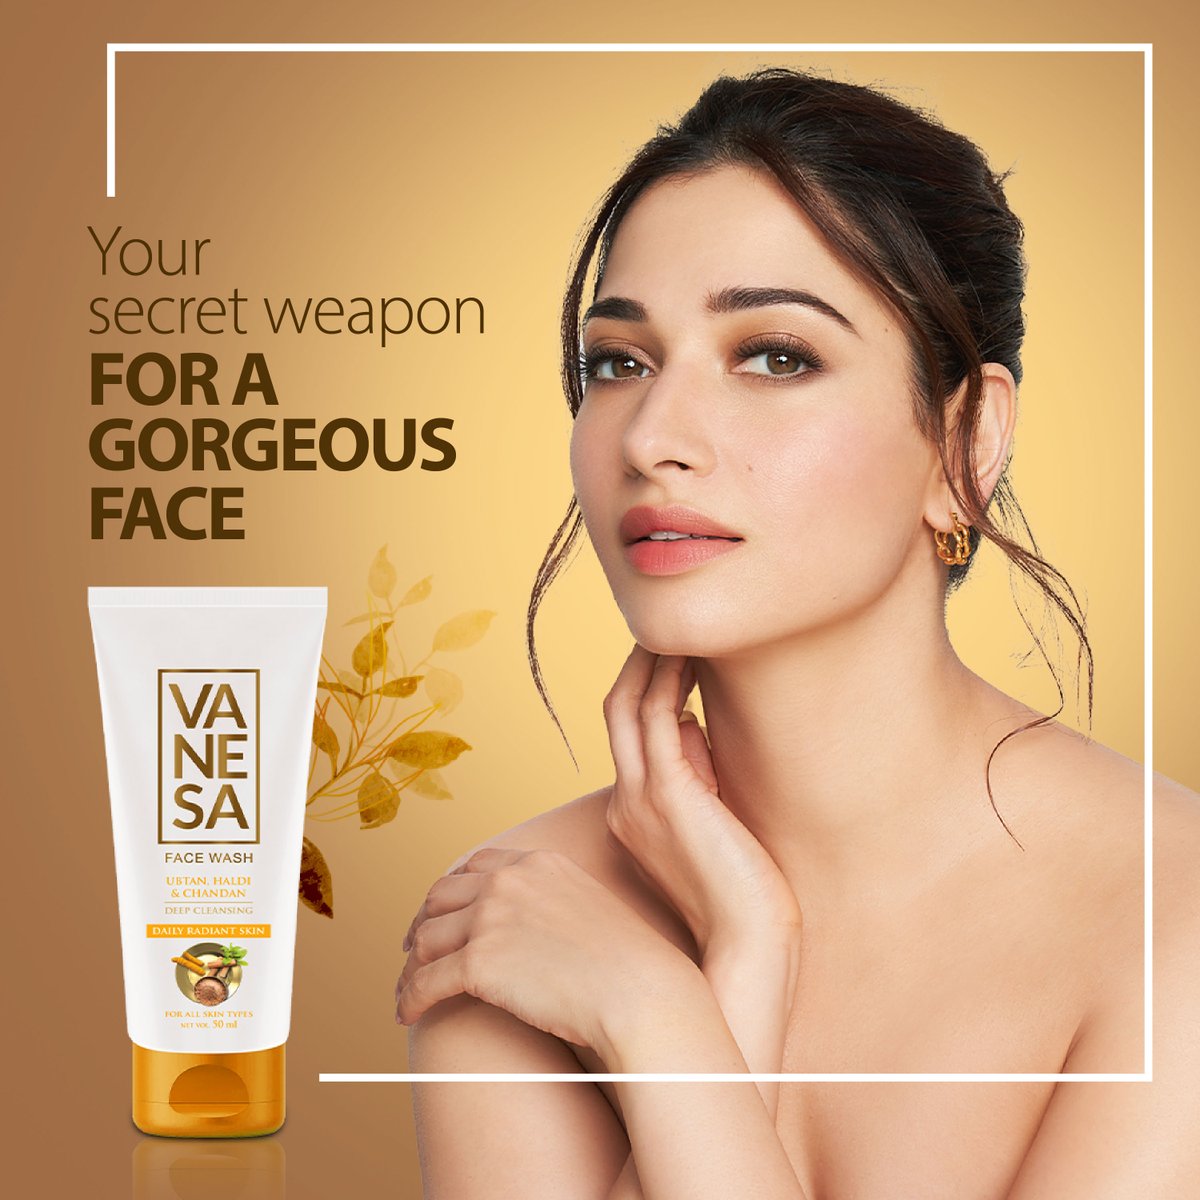 Because your skin deserves the best. Experience the luxury of our facewash and let your radiance steal the show! Love Your Self Love Vanesa #vanesabeauty #vanesaSkincare #Vanesa #Facewash #VanesaFacewash #Ubtan #haldi #chandan #Selflove #Facecare #Skin #tamannahbhatia